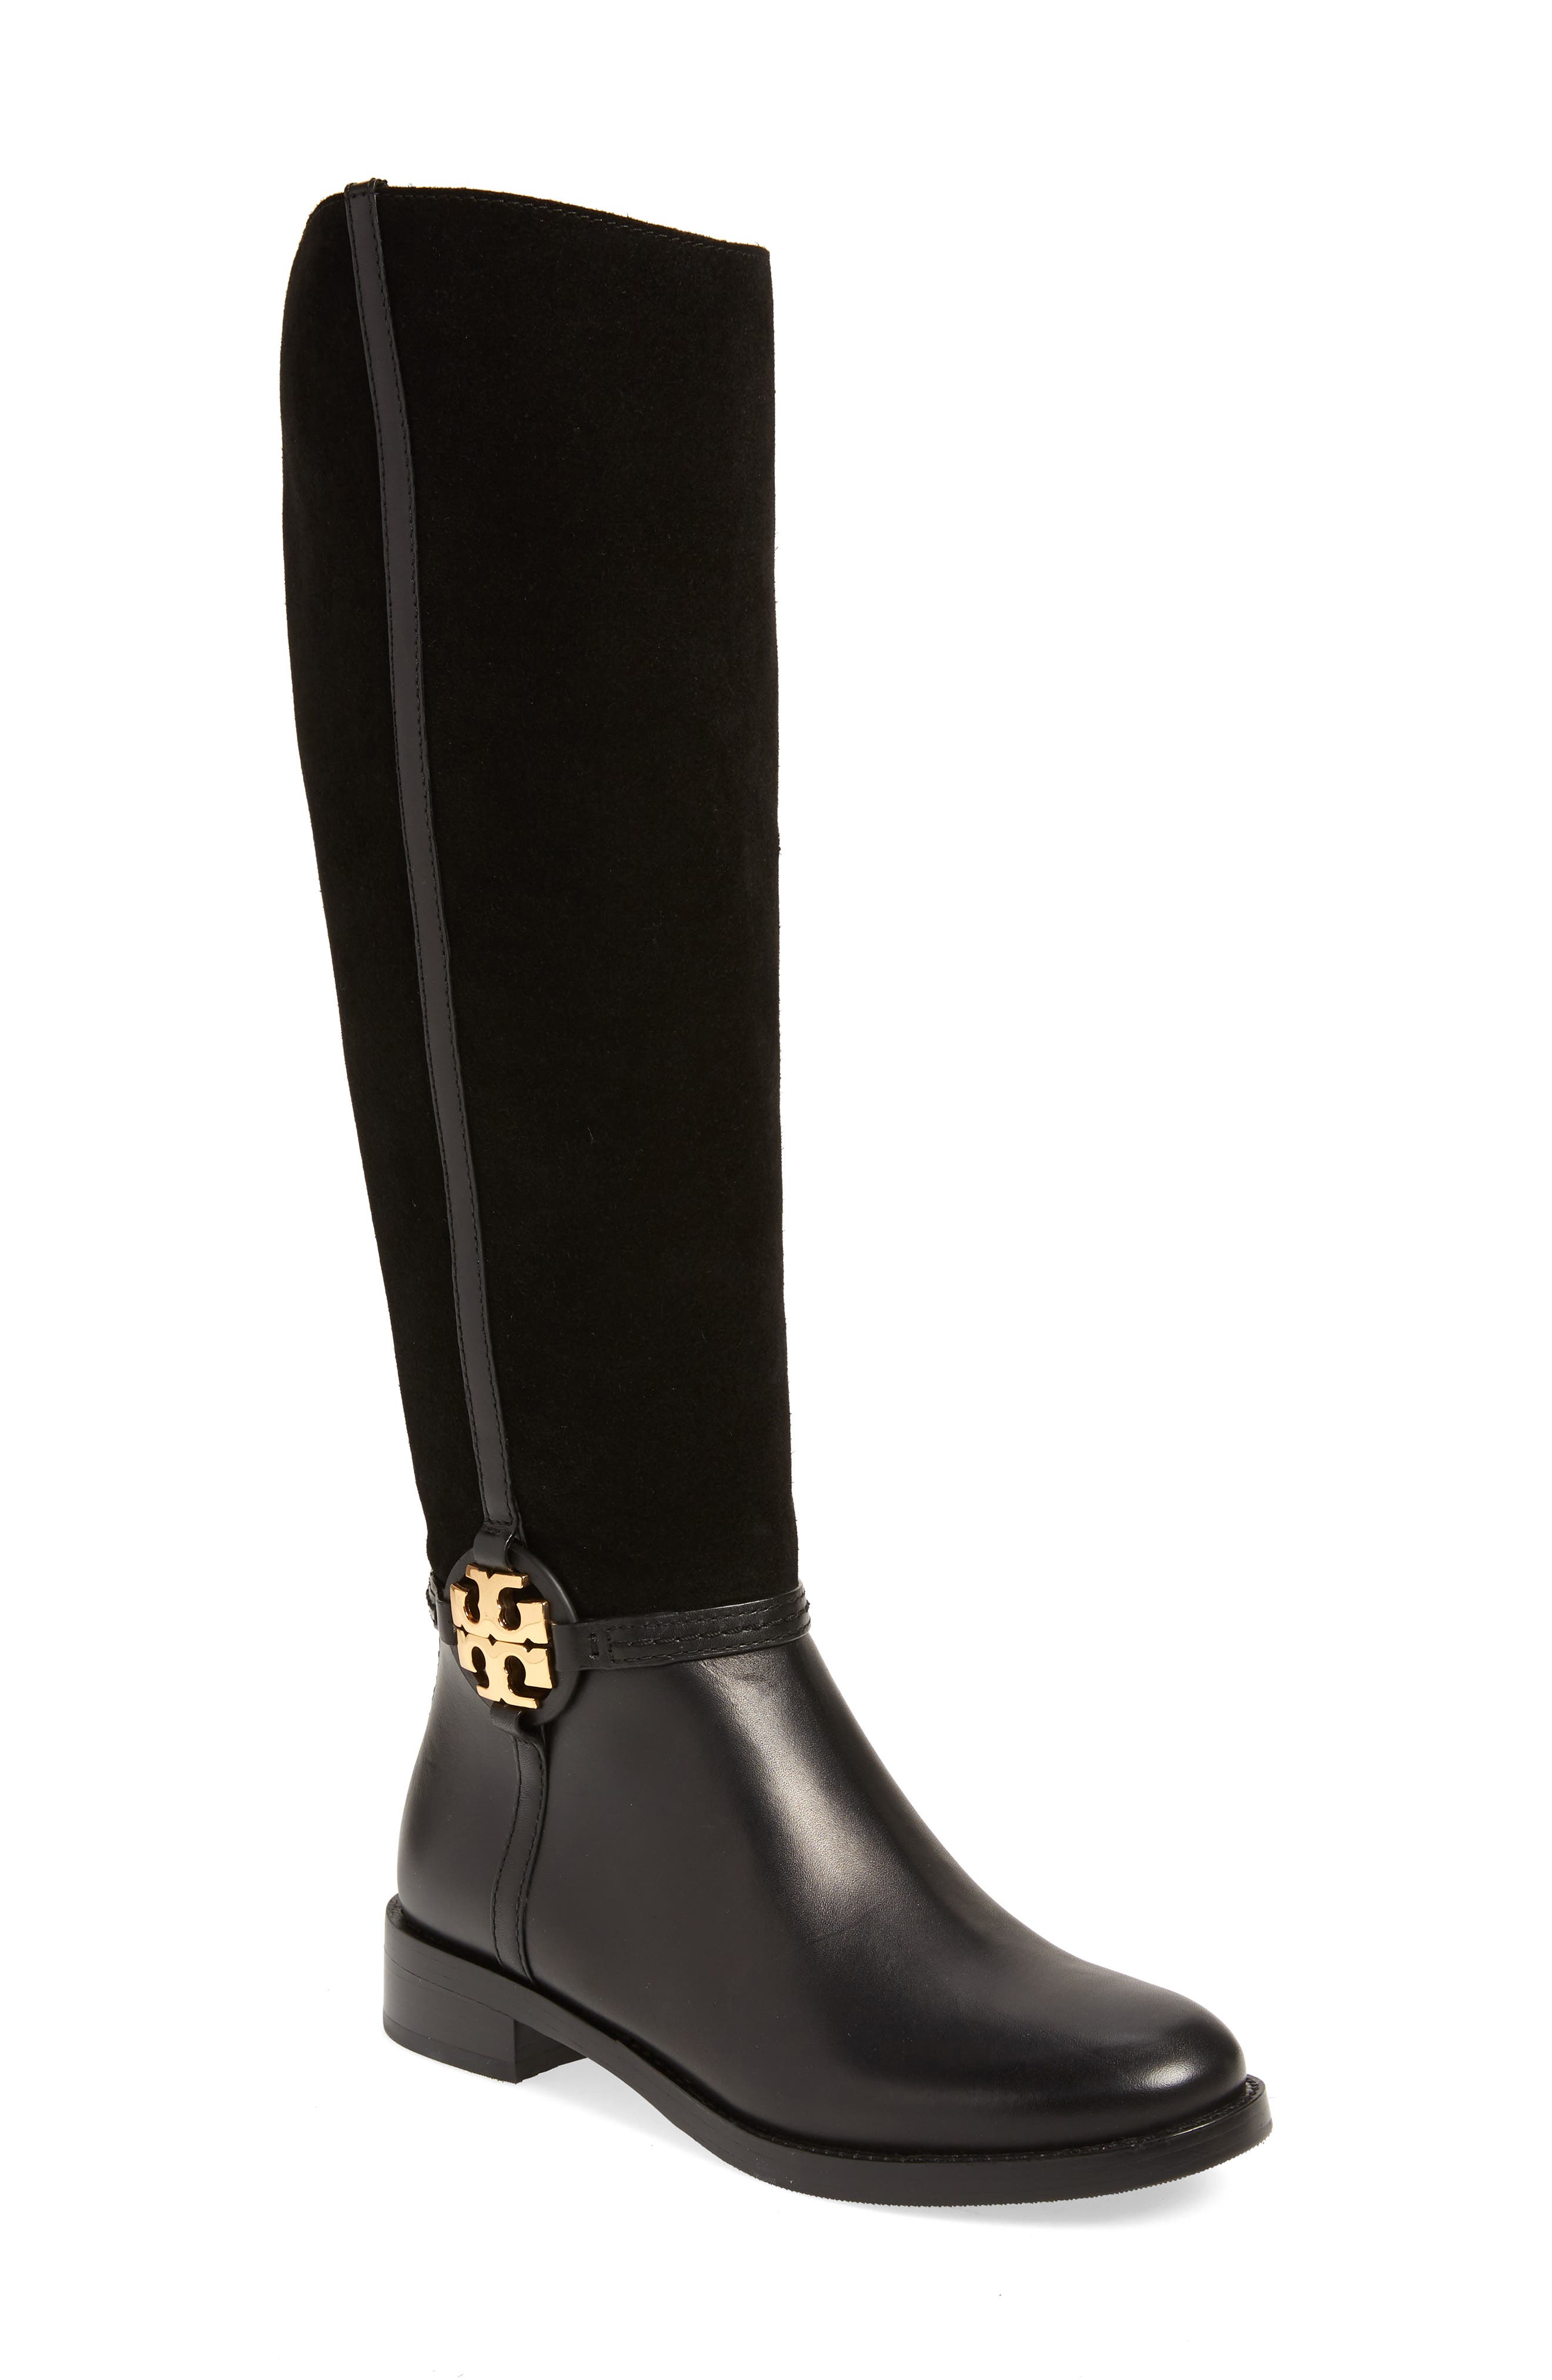 tory burch boots nordstrom